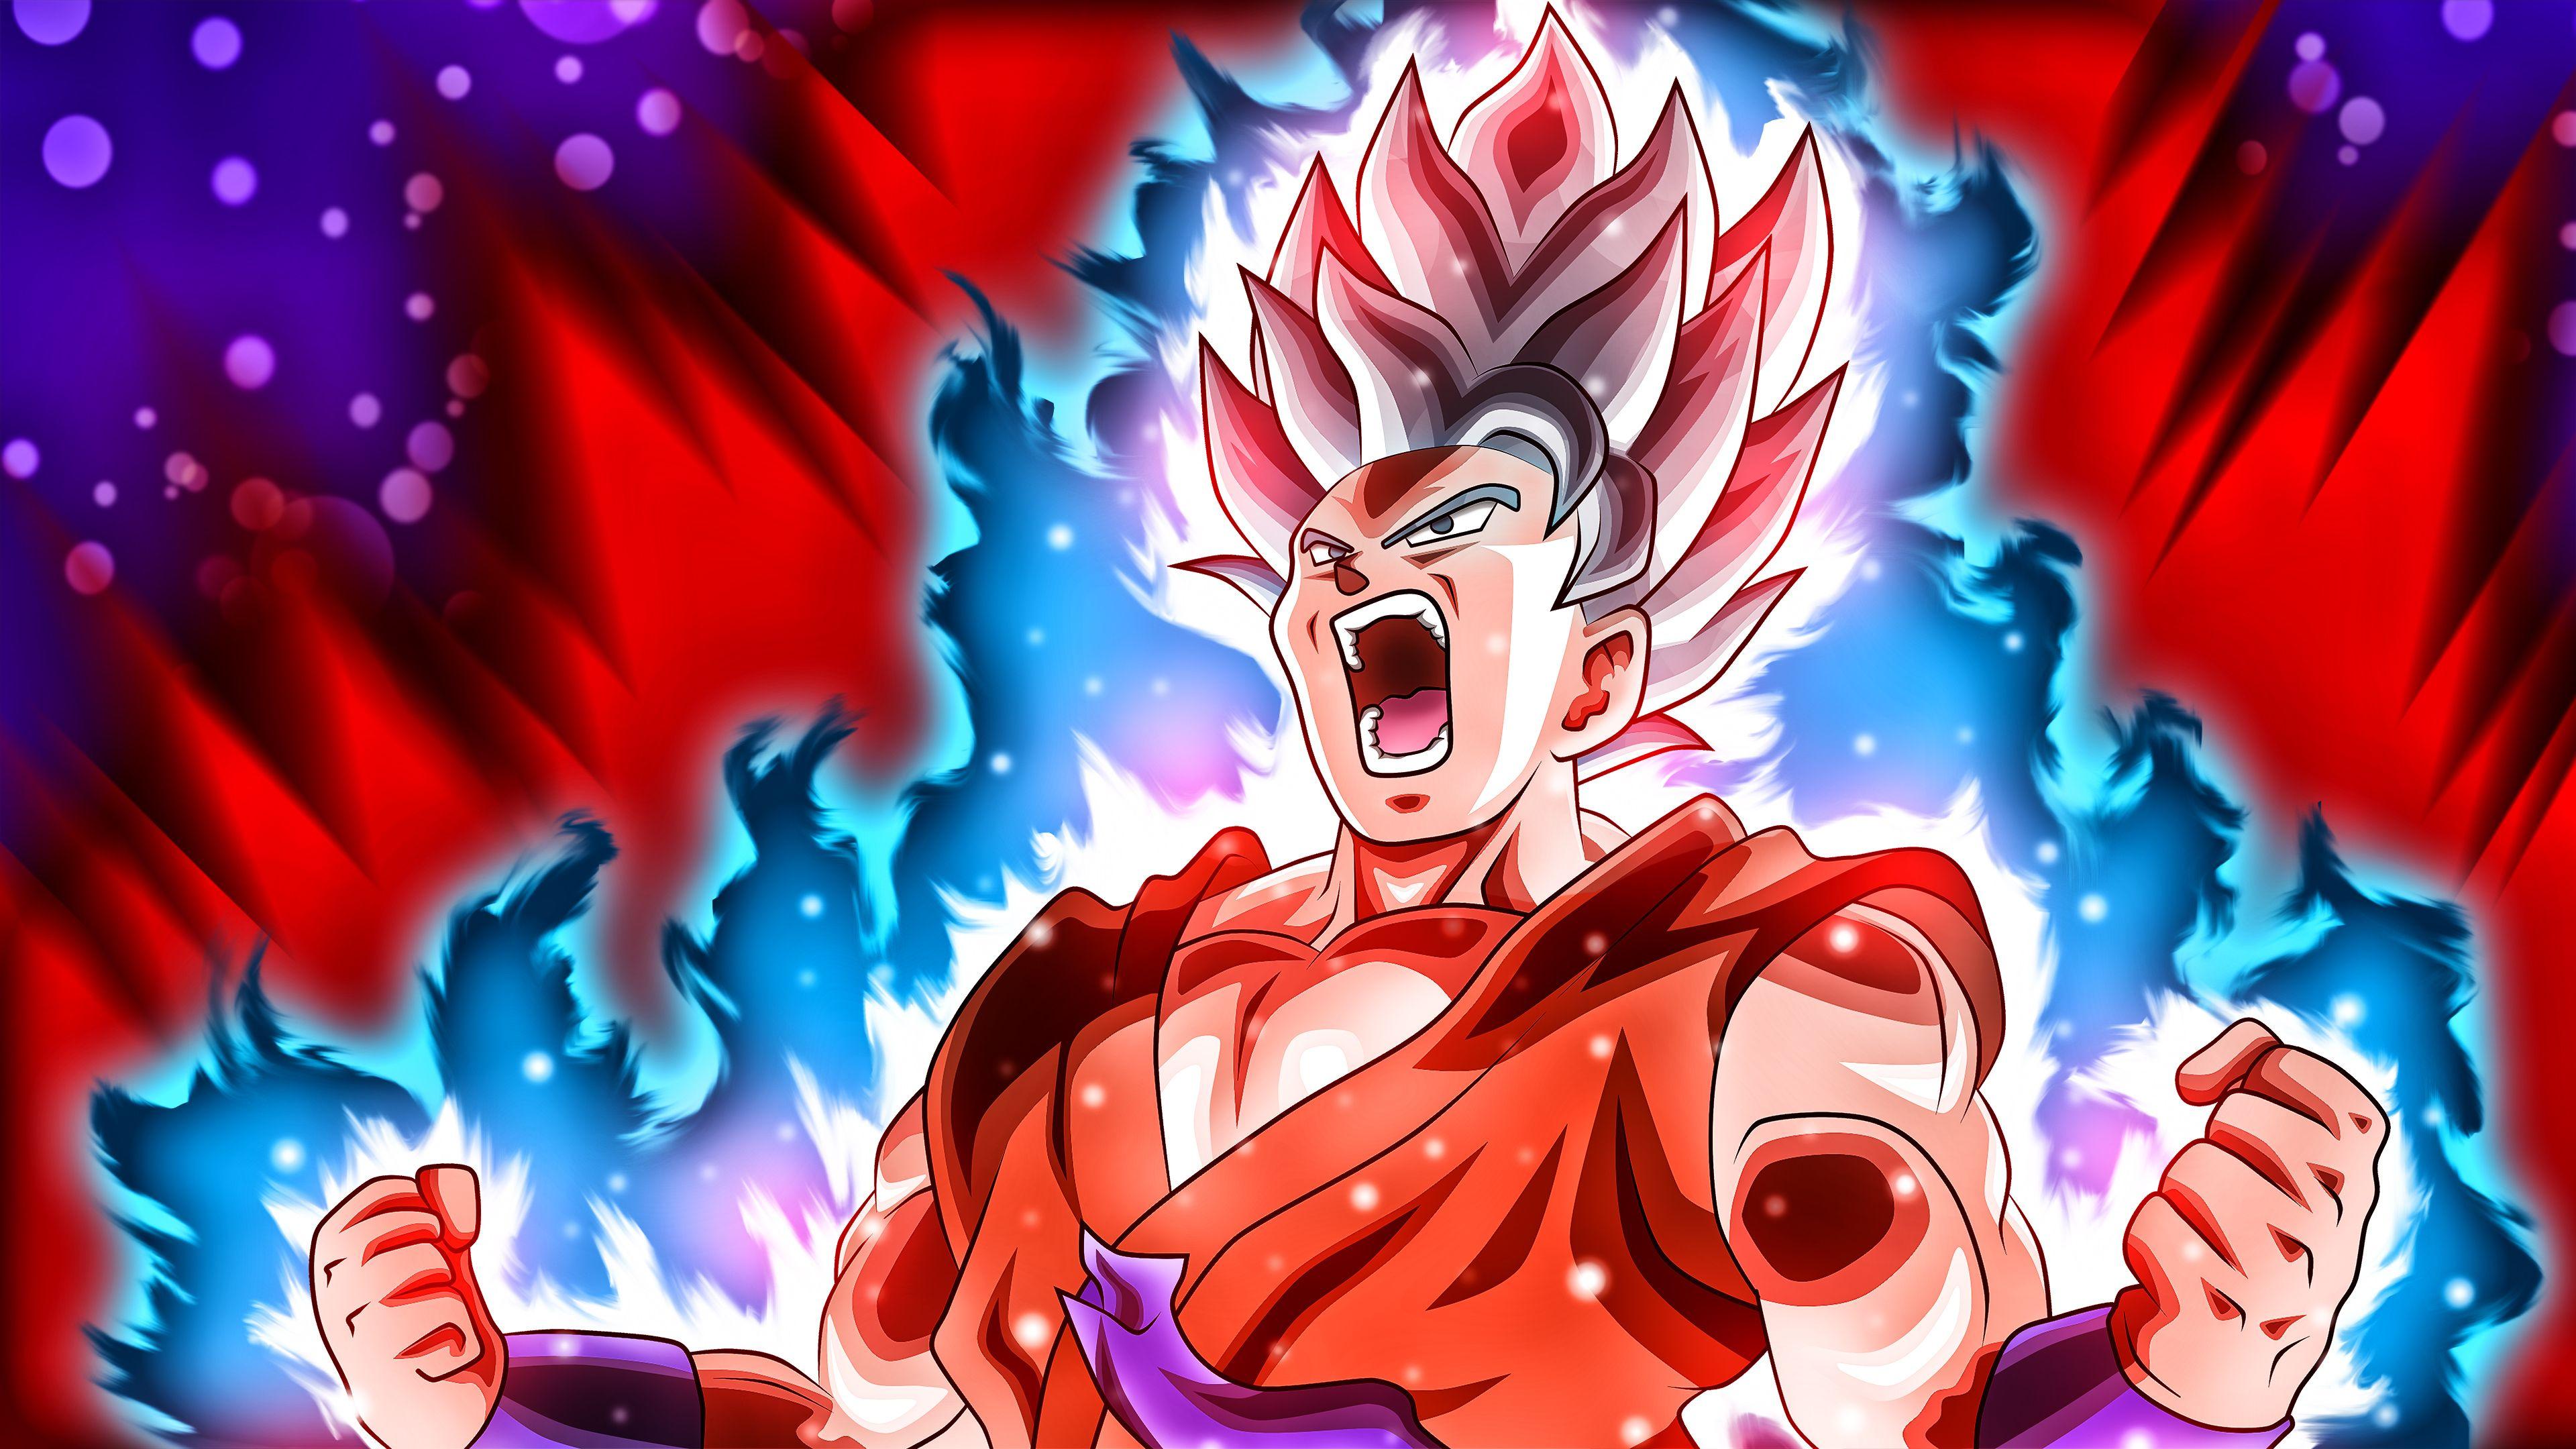 Super Saiyan Blue Kaioken Hair: What Is It and How Does It Work? - wide 4